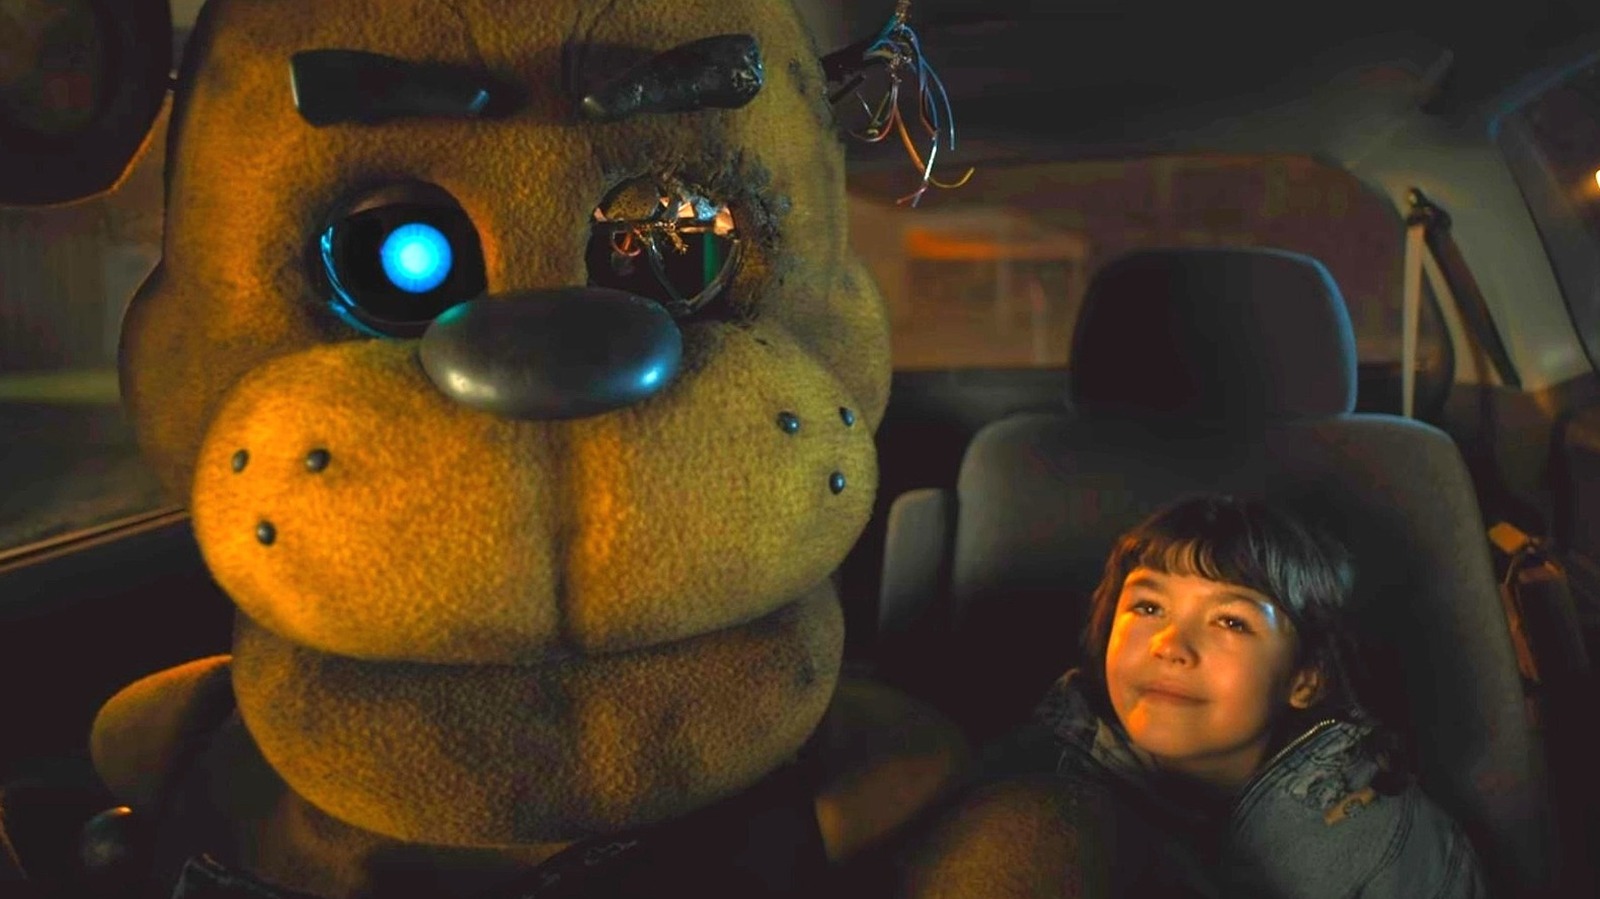 Five Nights At Freddy's Is Poised To Become The Next Big Horror Sensation  At The Box Office